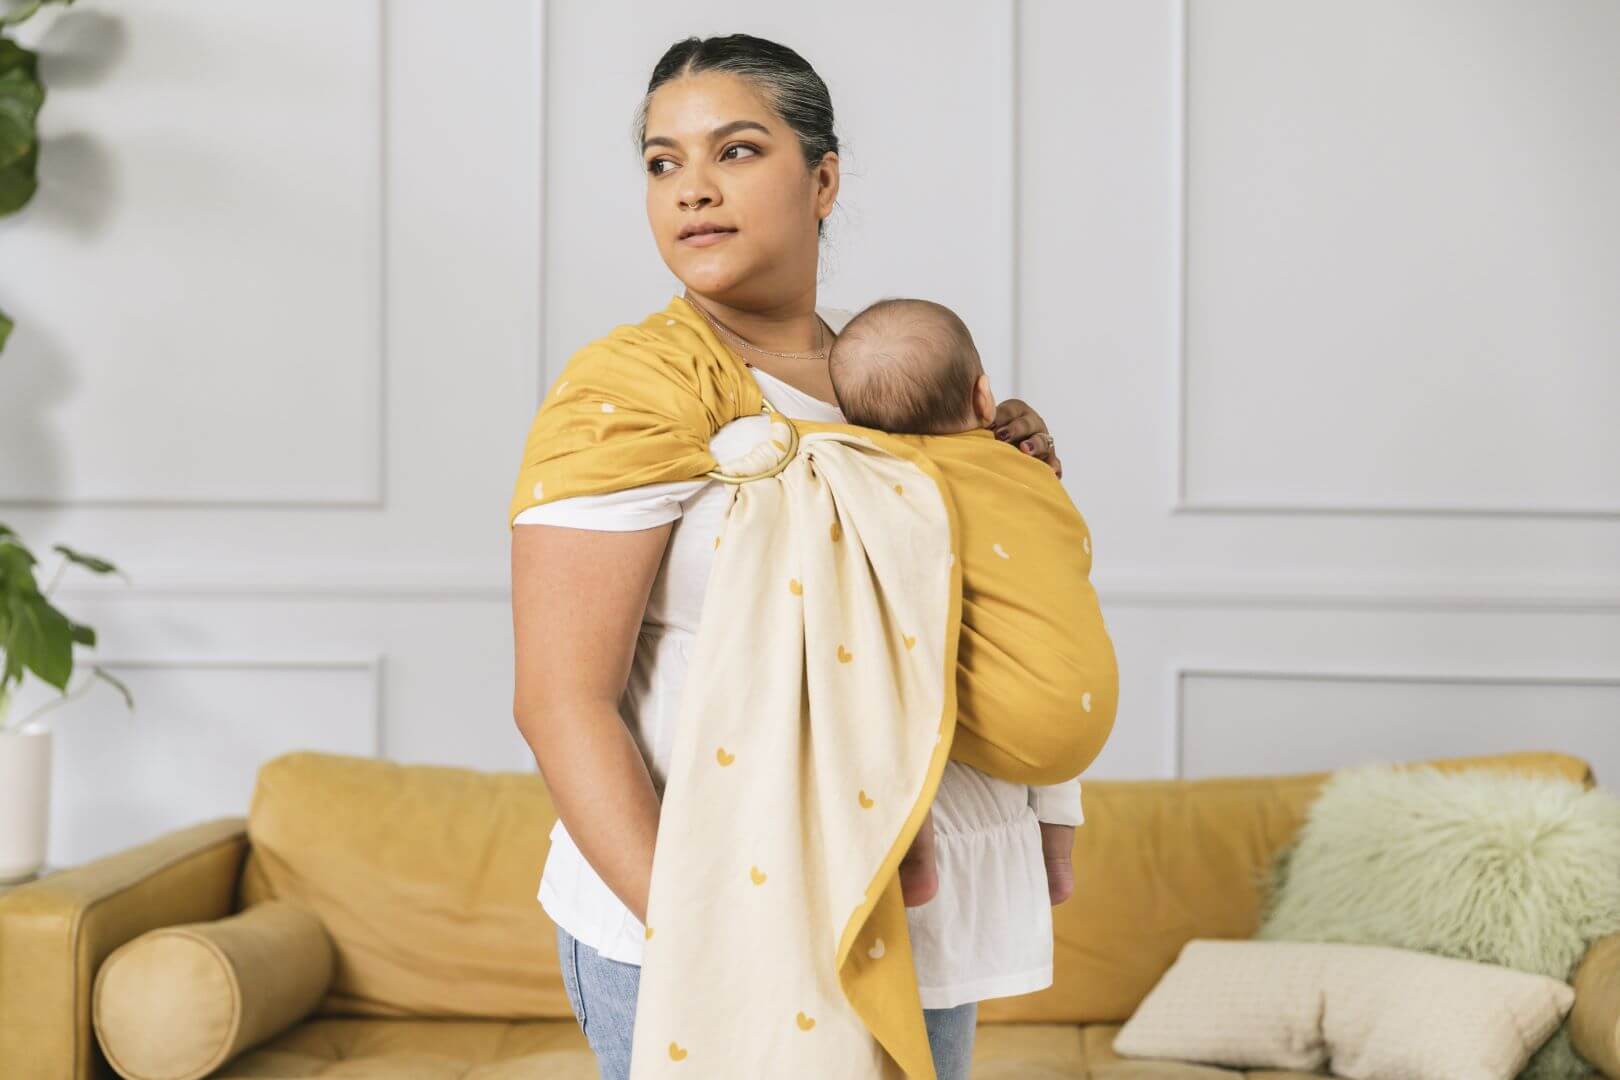 Small infant being worn in a baby sling from birth with a heart design in mustard yellow